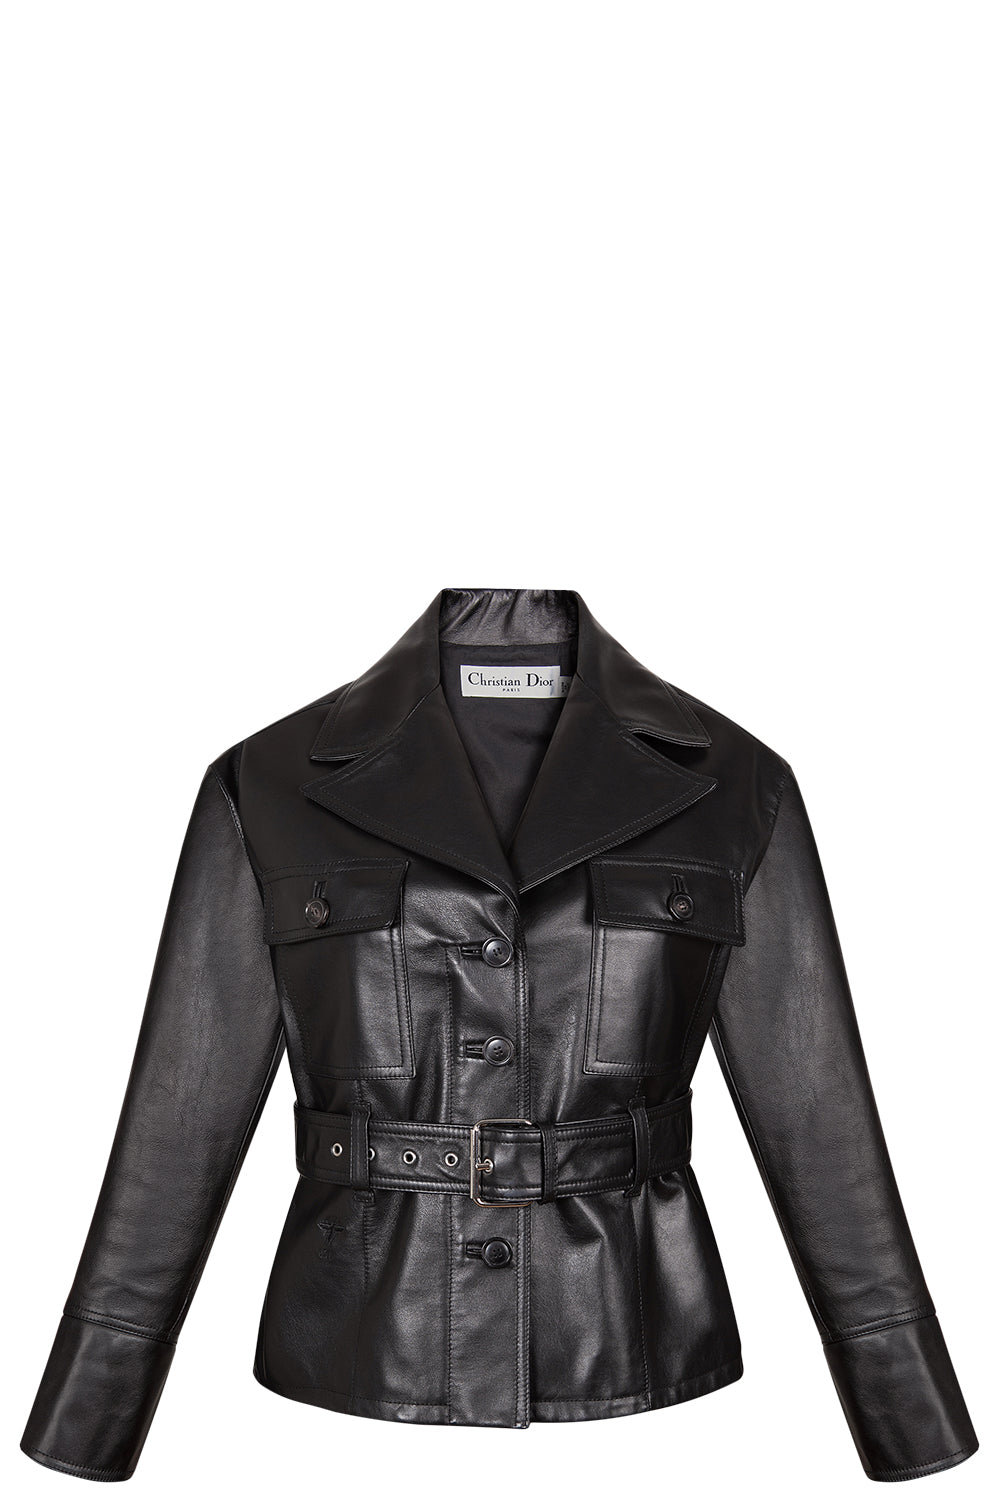 CHRISTIAN DIOR Leather Jacket